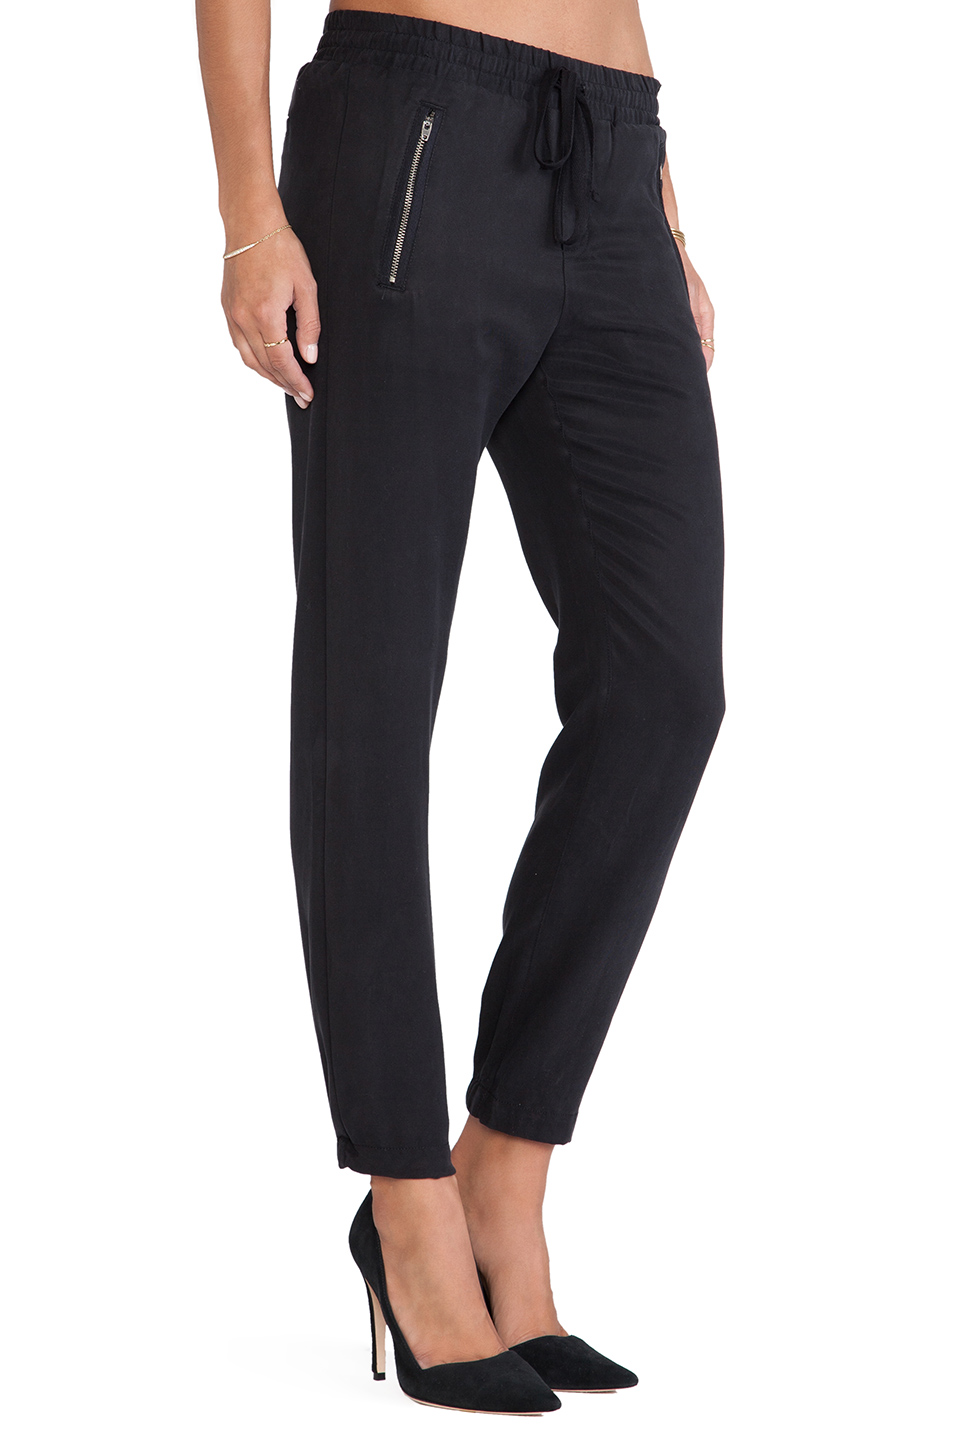 Michael Stars Drawstring Pull-on Pant with Zippers in Black